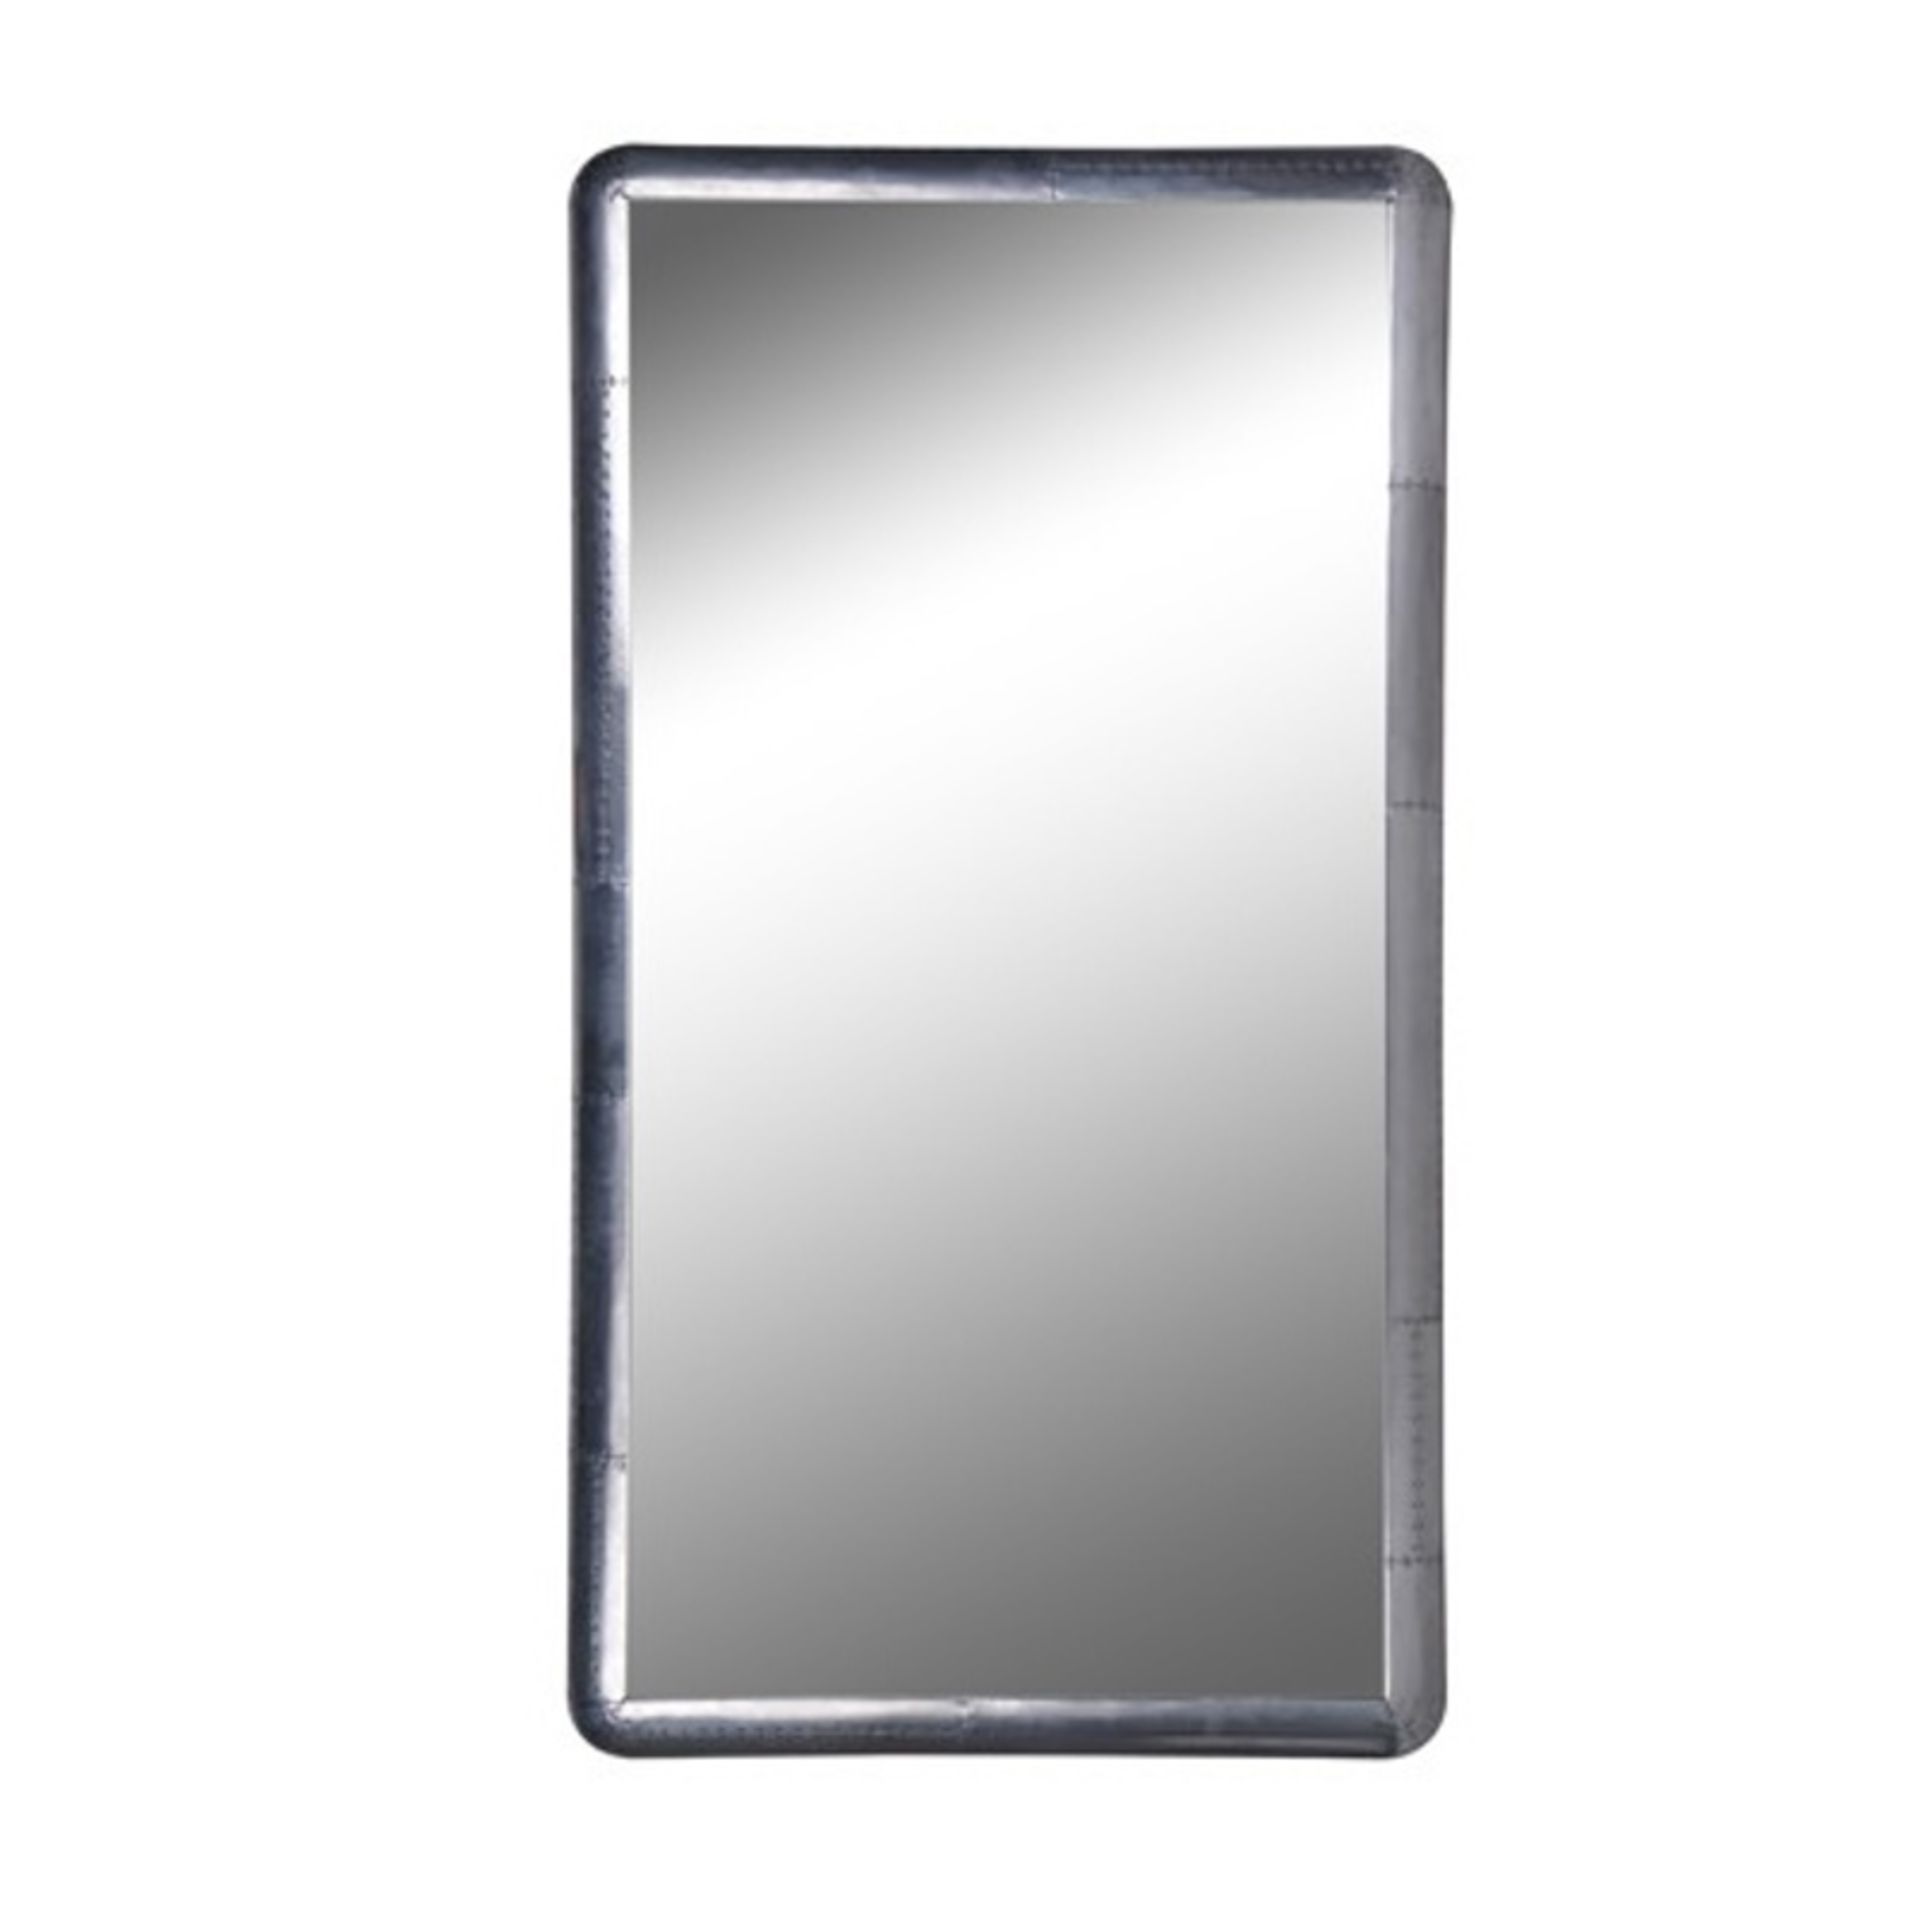 Aviator Blackhawk Tall Mirror The Aviator Blackhawk collection is an industrial-style range inspired - Image 2 of 2